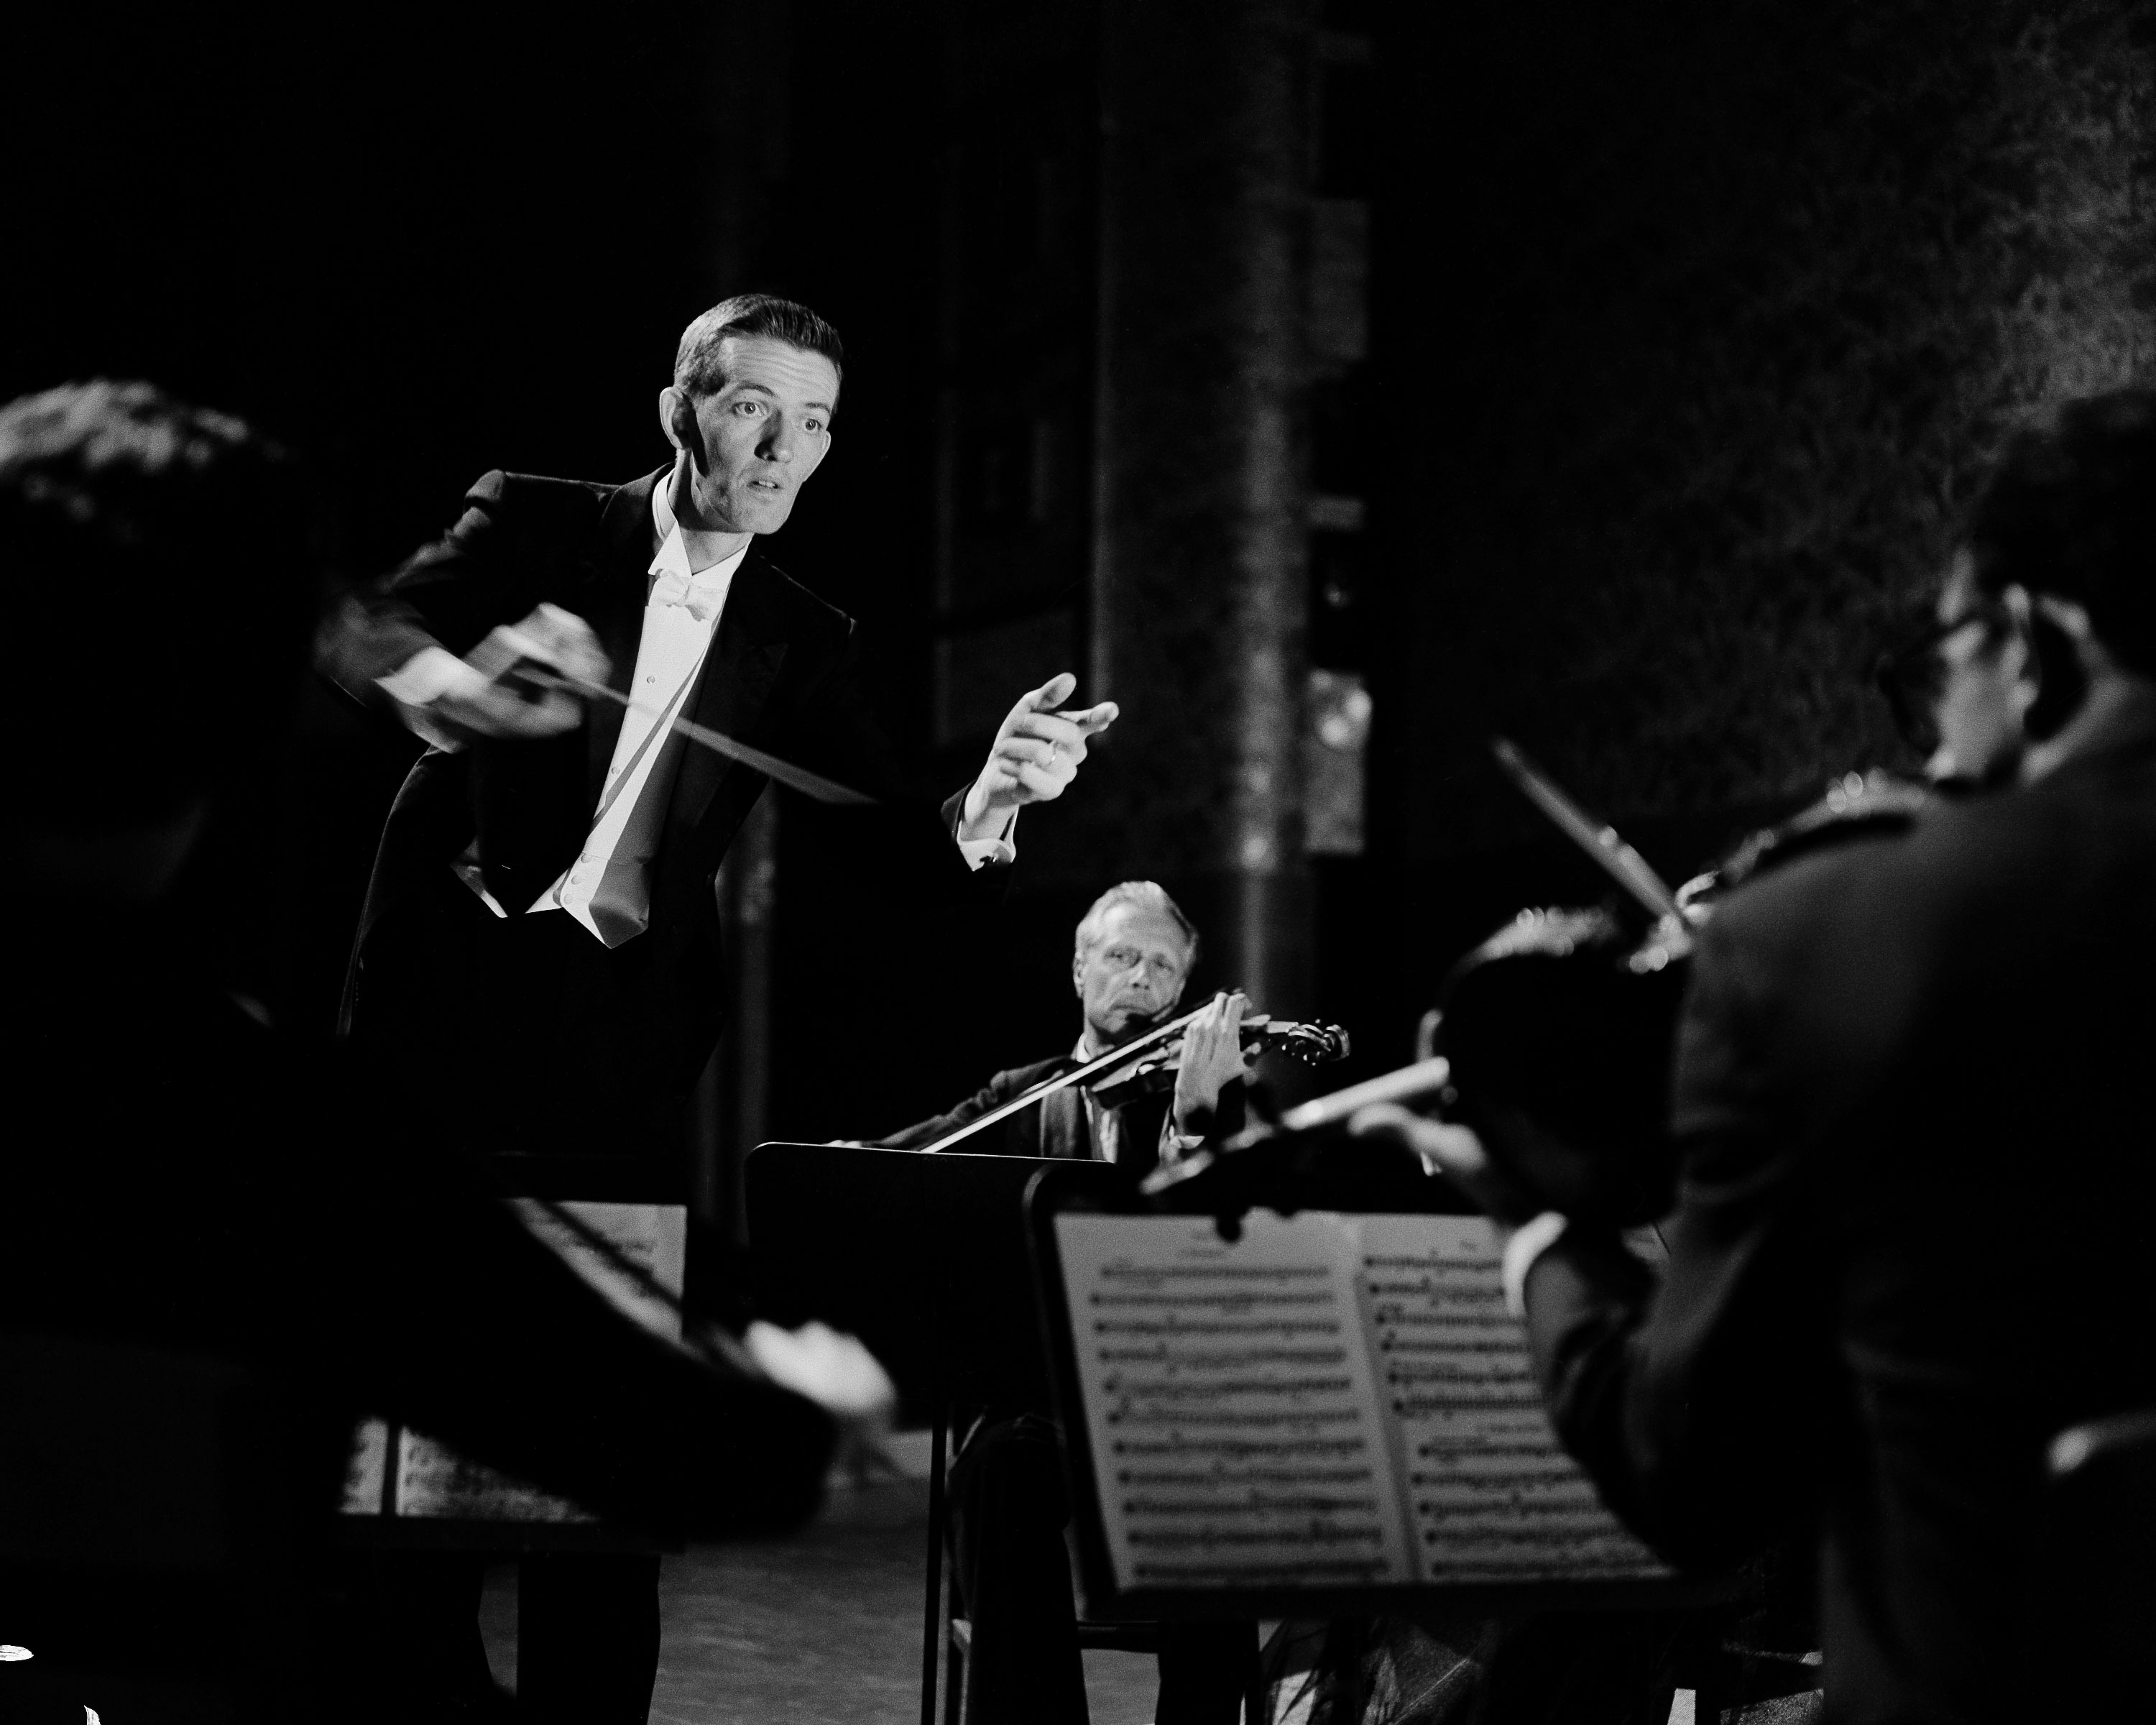 Dr. Gus conducting the University Symphony Orchestra, 1963